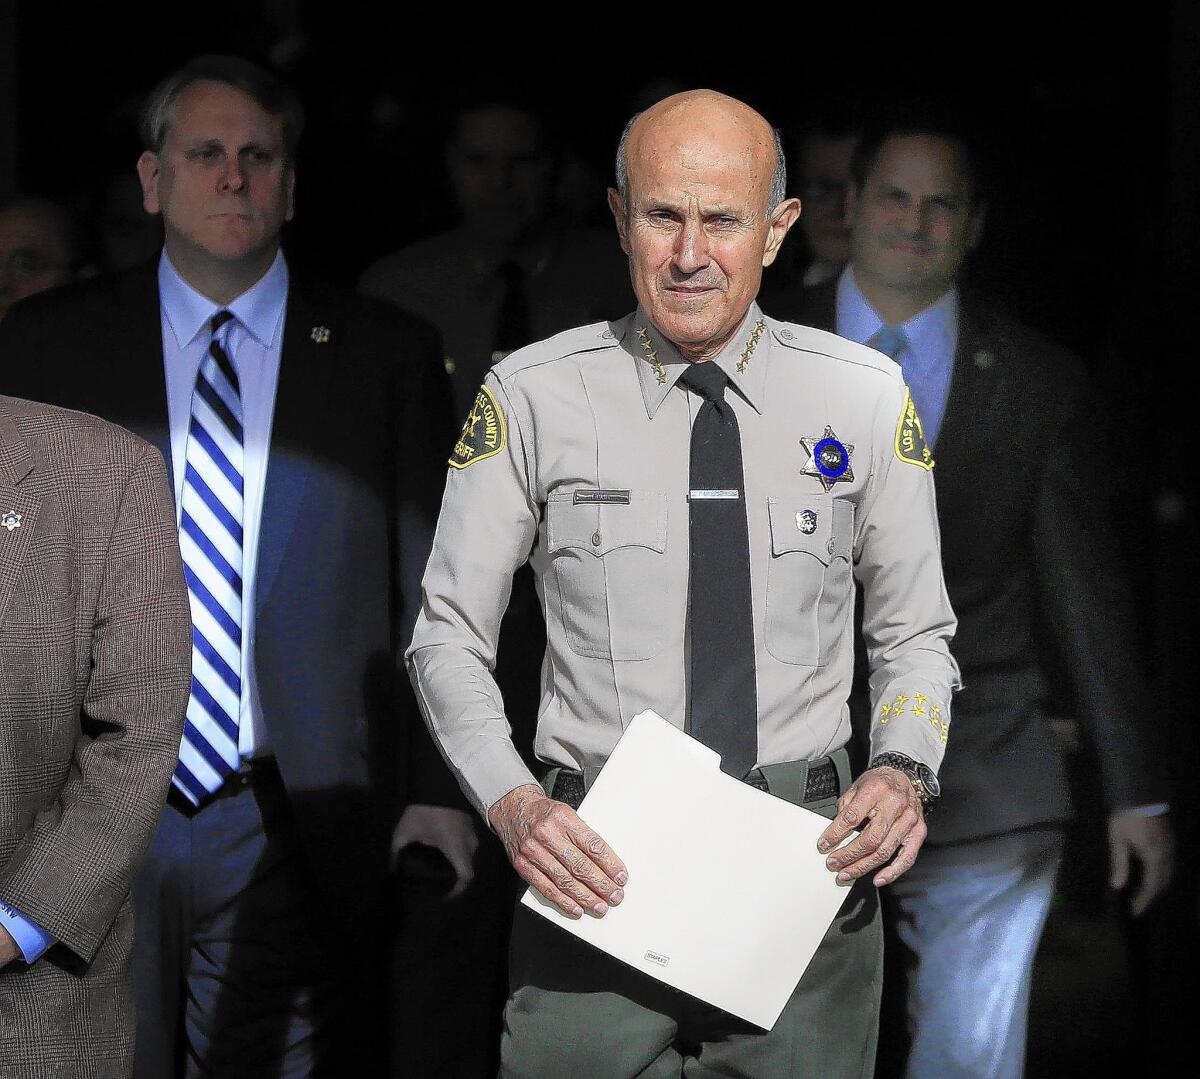 Then-Sheriff Lee Baca held high-level meetings after an inmate was found with an FBI cellphone in 2011, a defendant testified.